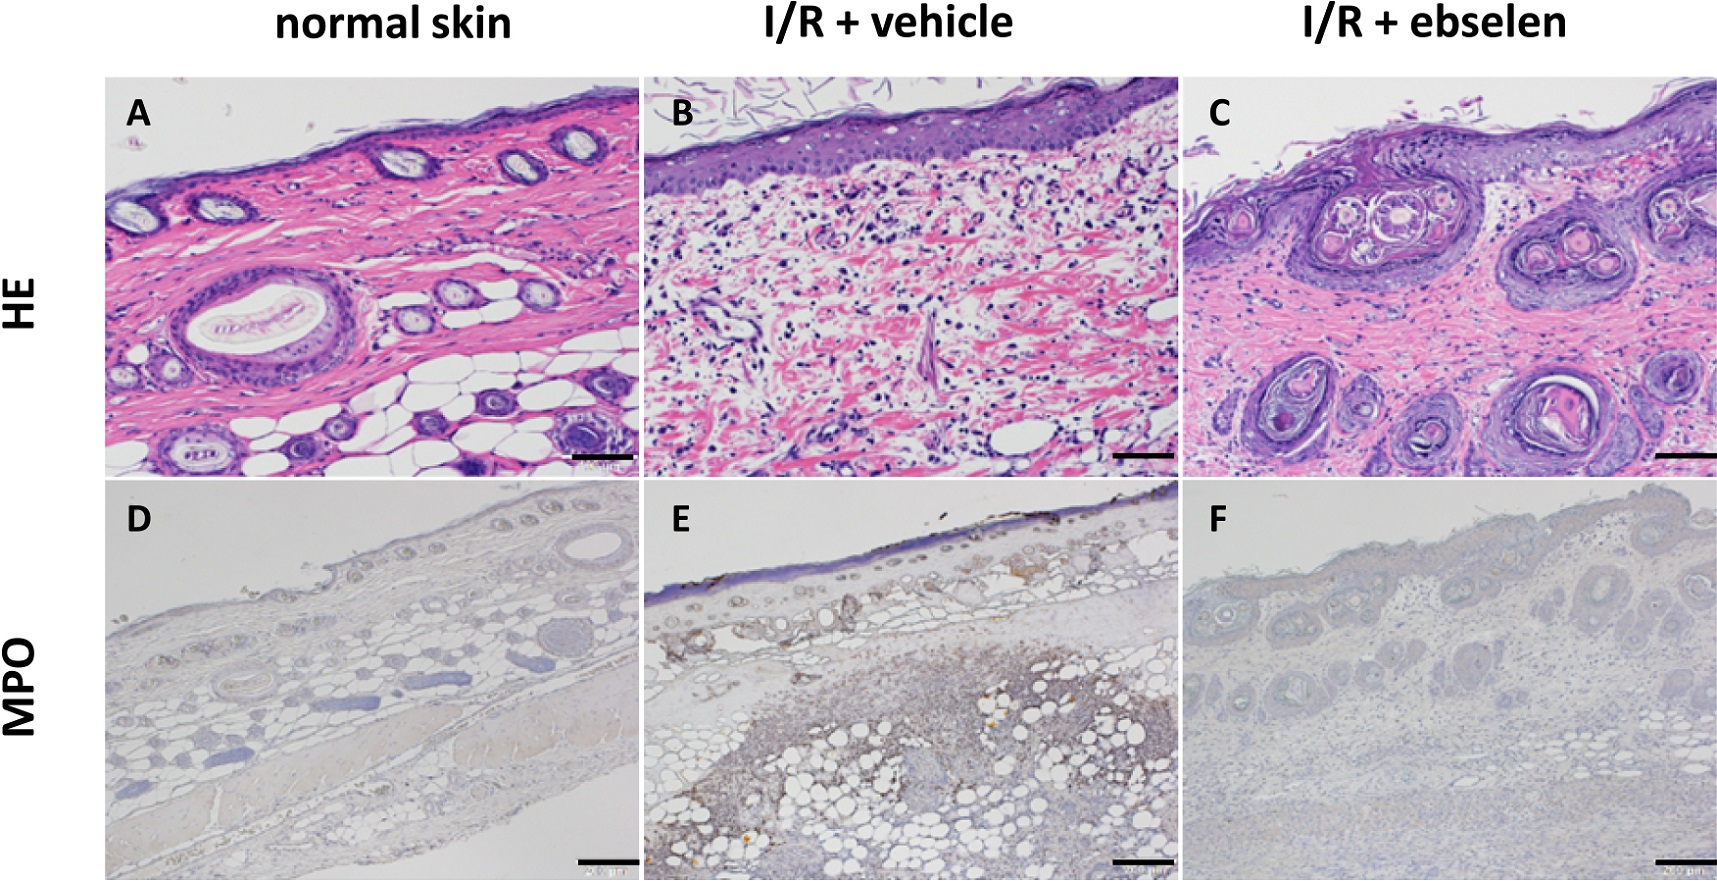 Protective Effect of Ebselen on Ischemia-reperfusion Injury in Epigastric Skin Flaps in Rats